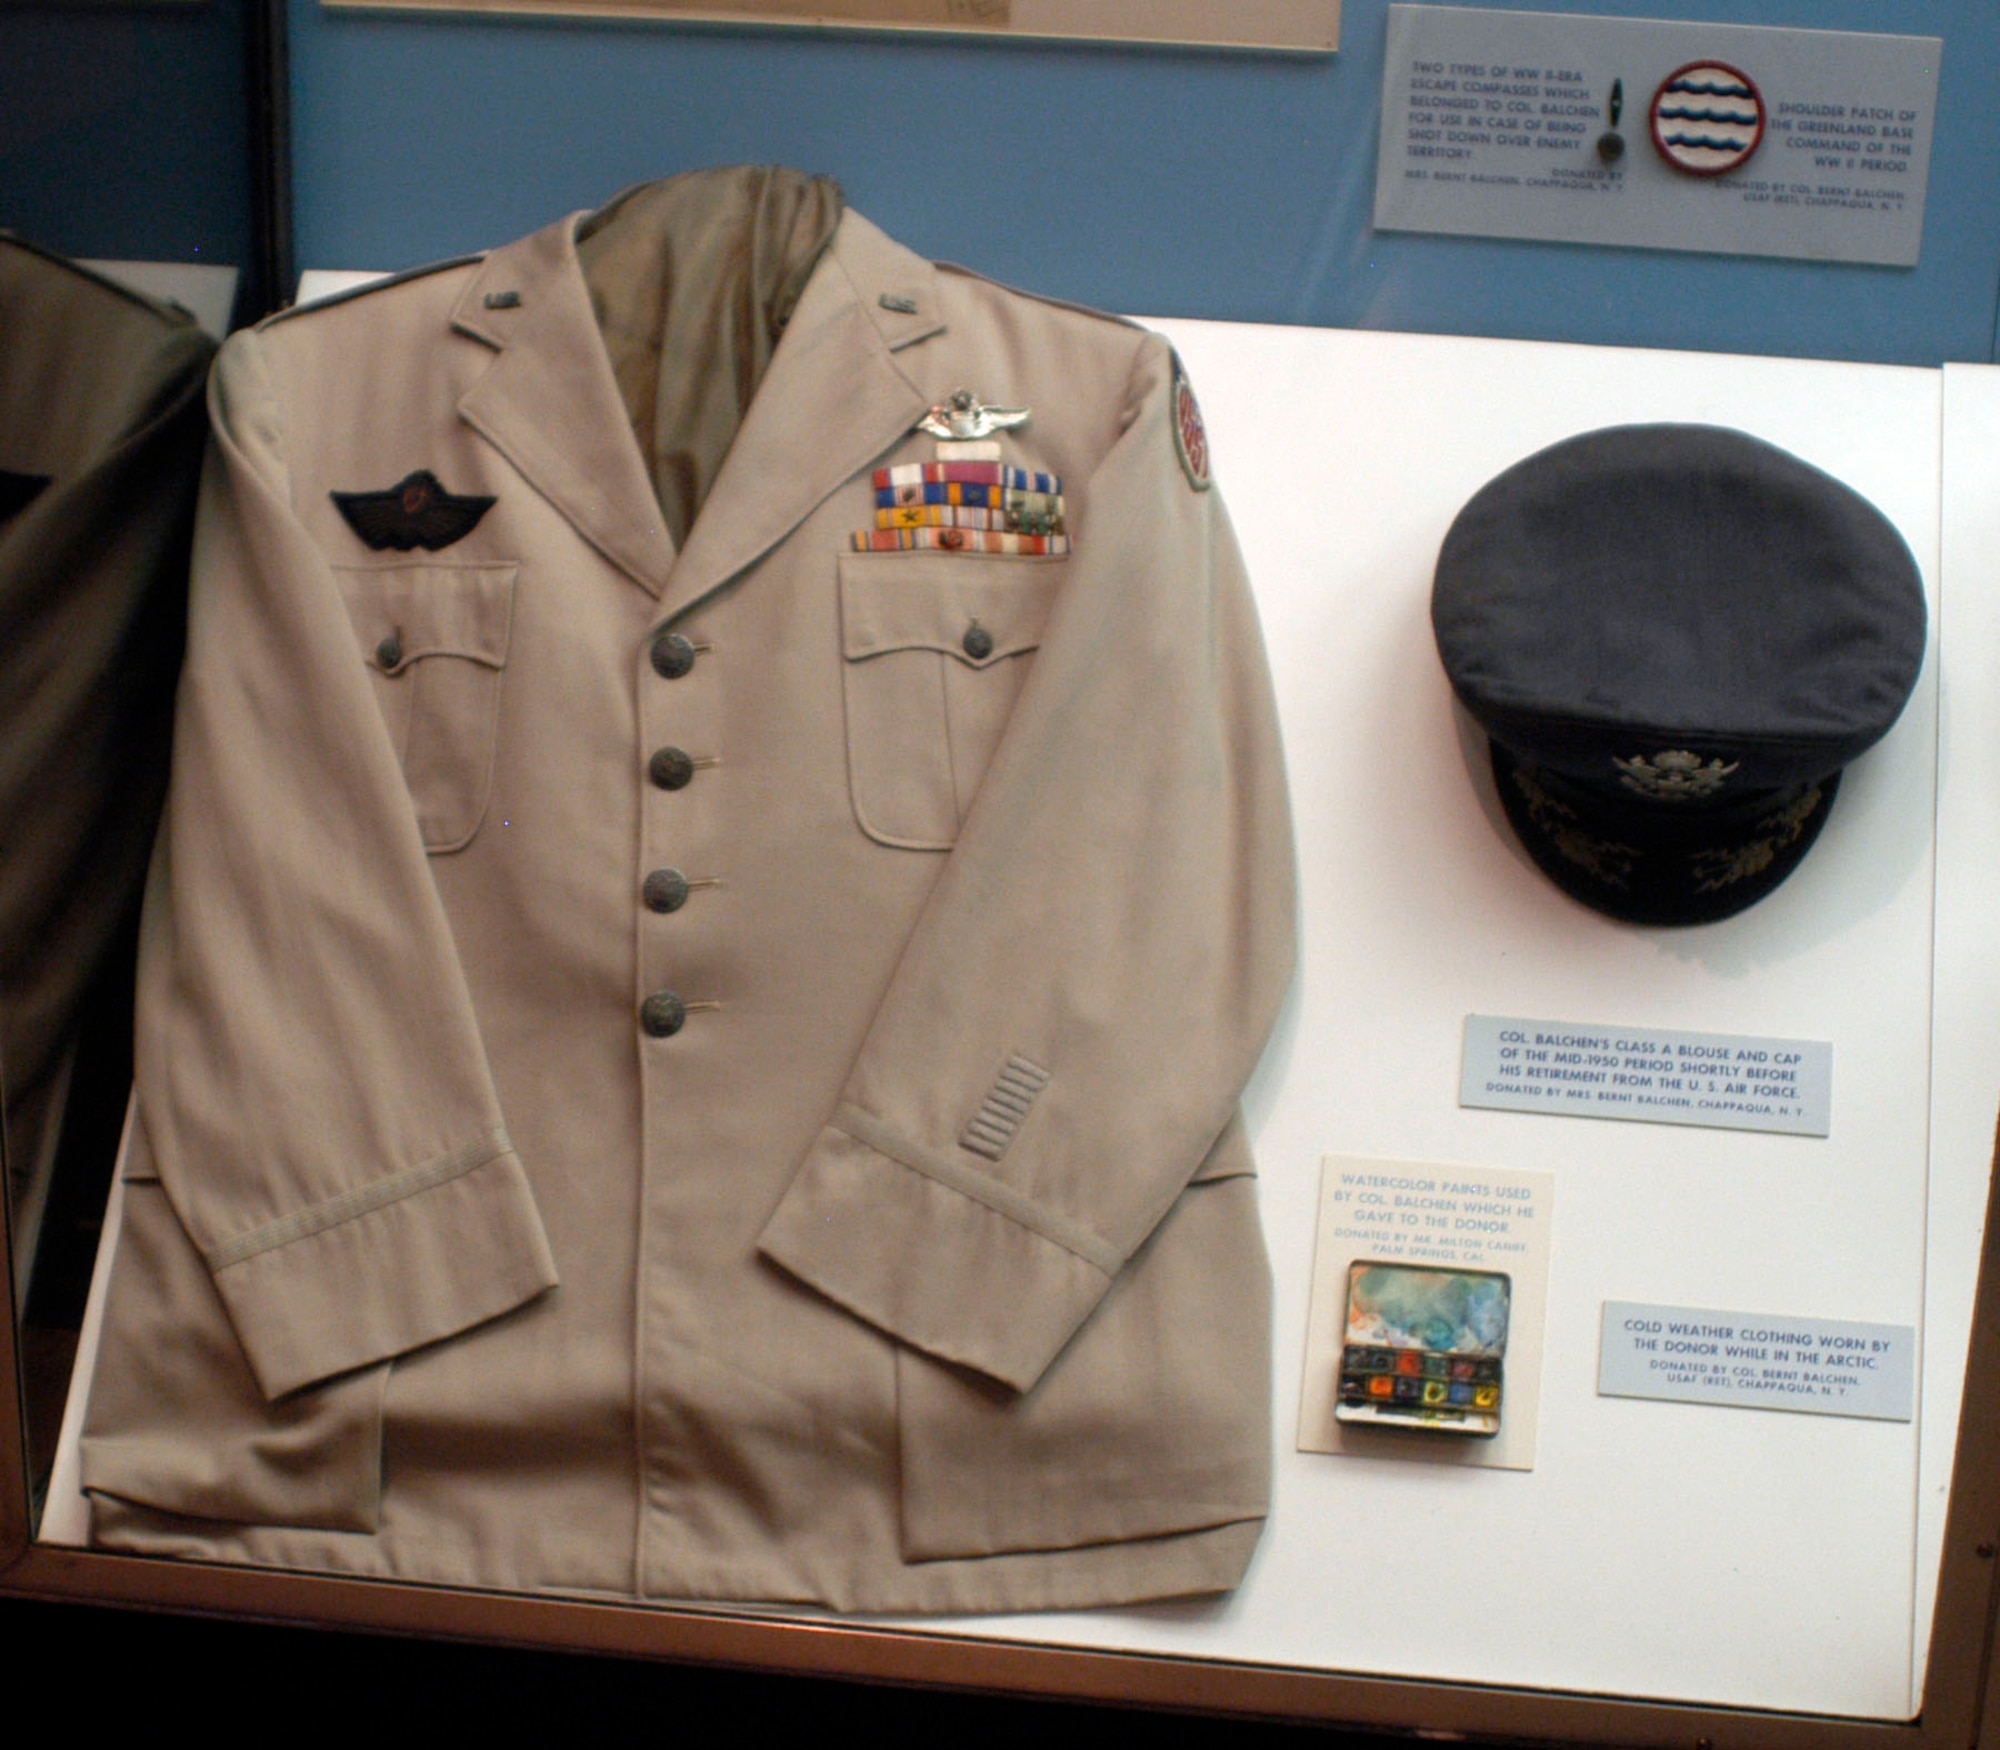 DAYTON, Ohio -- Col. Bernt Balchin's Class A blouse and cap on display in the World War II Gallery at the National Museum of the U.S. Air Force. Donated by Mrs. Bernt Balchen of Chappaqua, N.Y. (U.S. Air Force photo) 